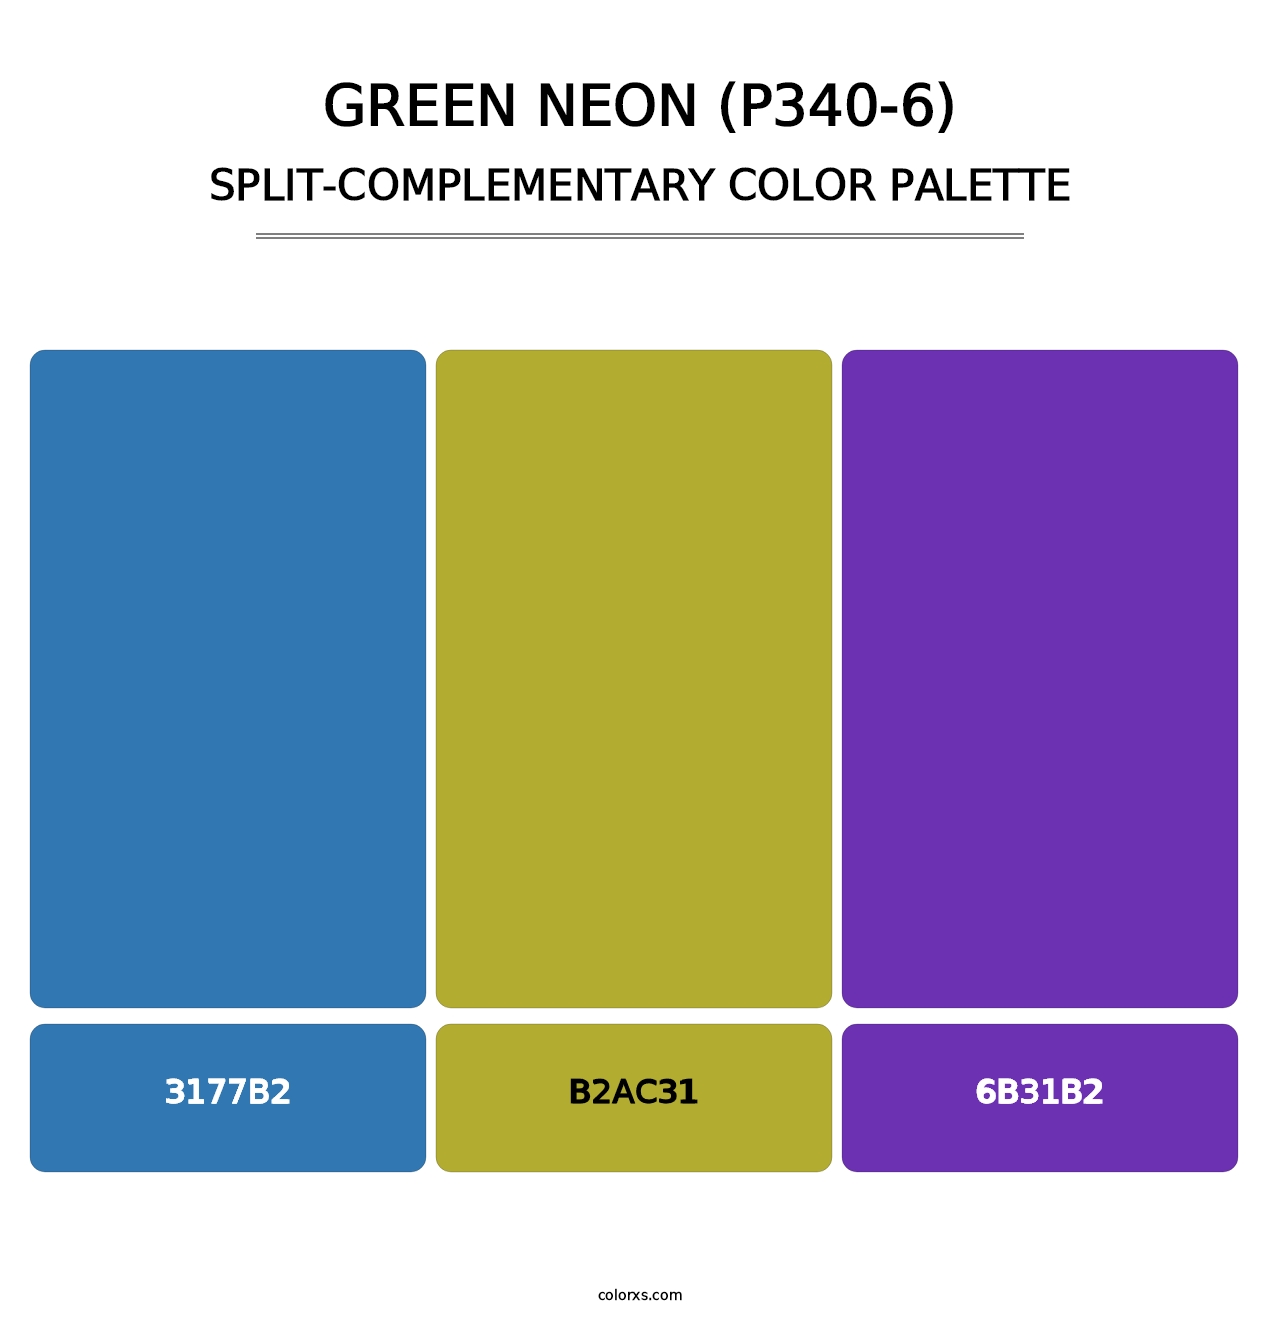 Green Neon (P340-6) - Split-Complementary Color Palette